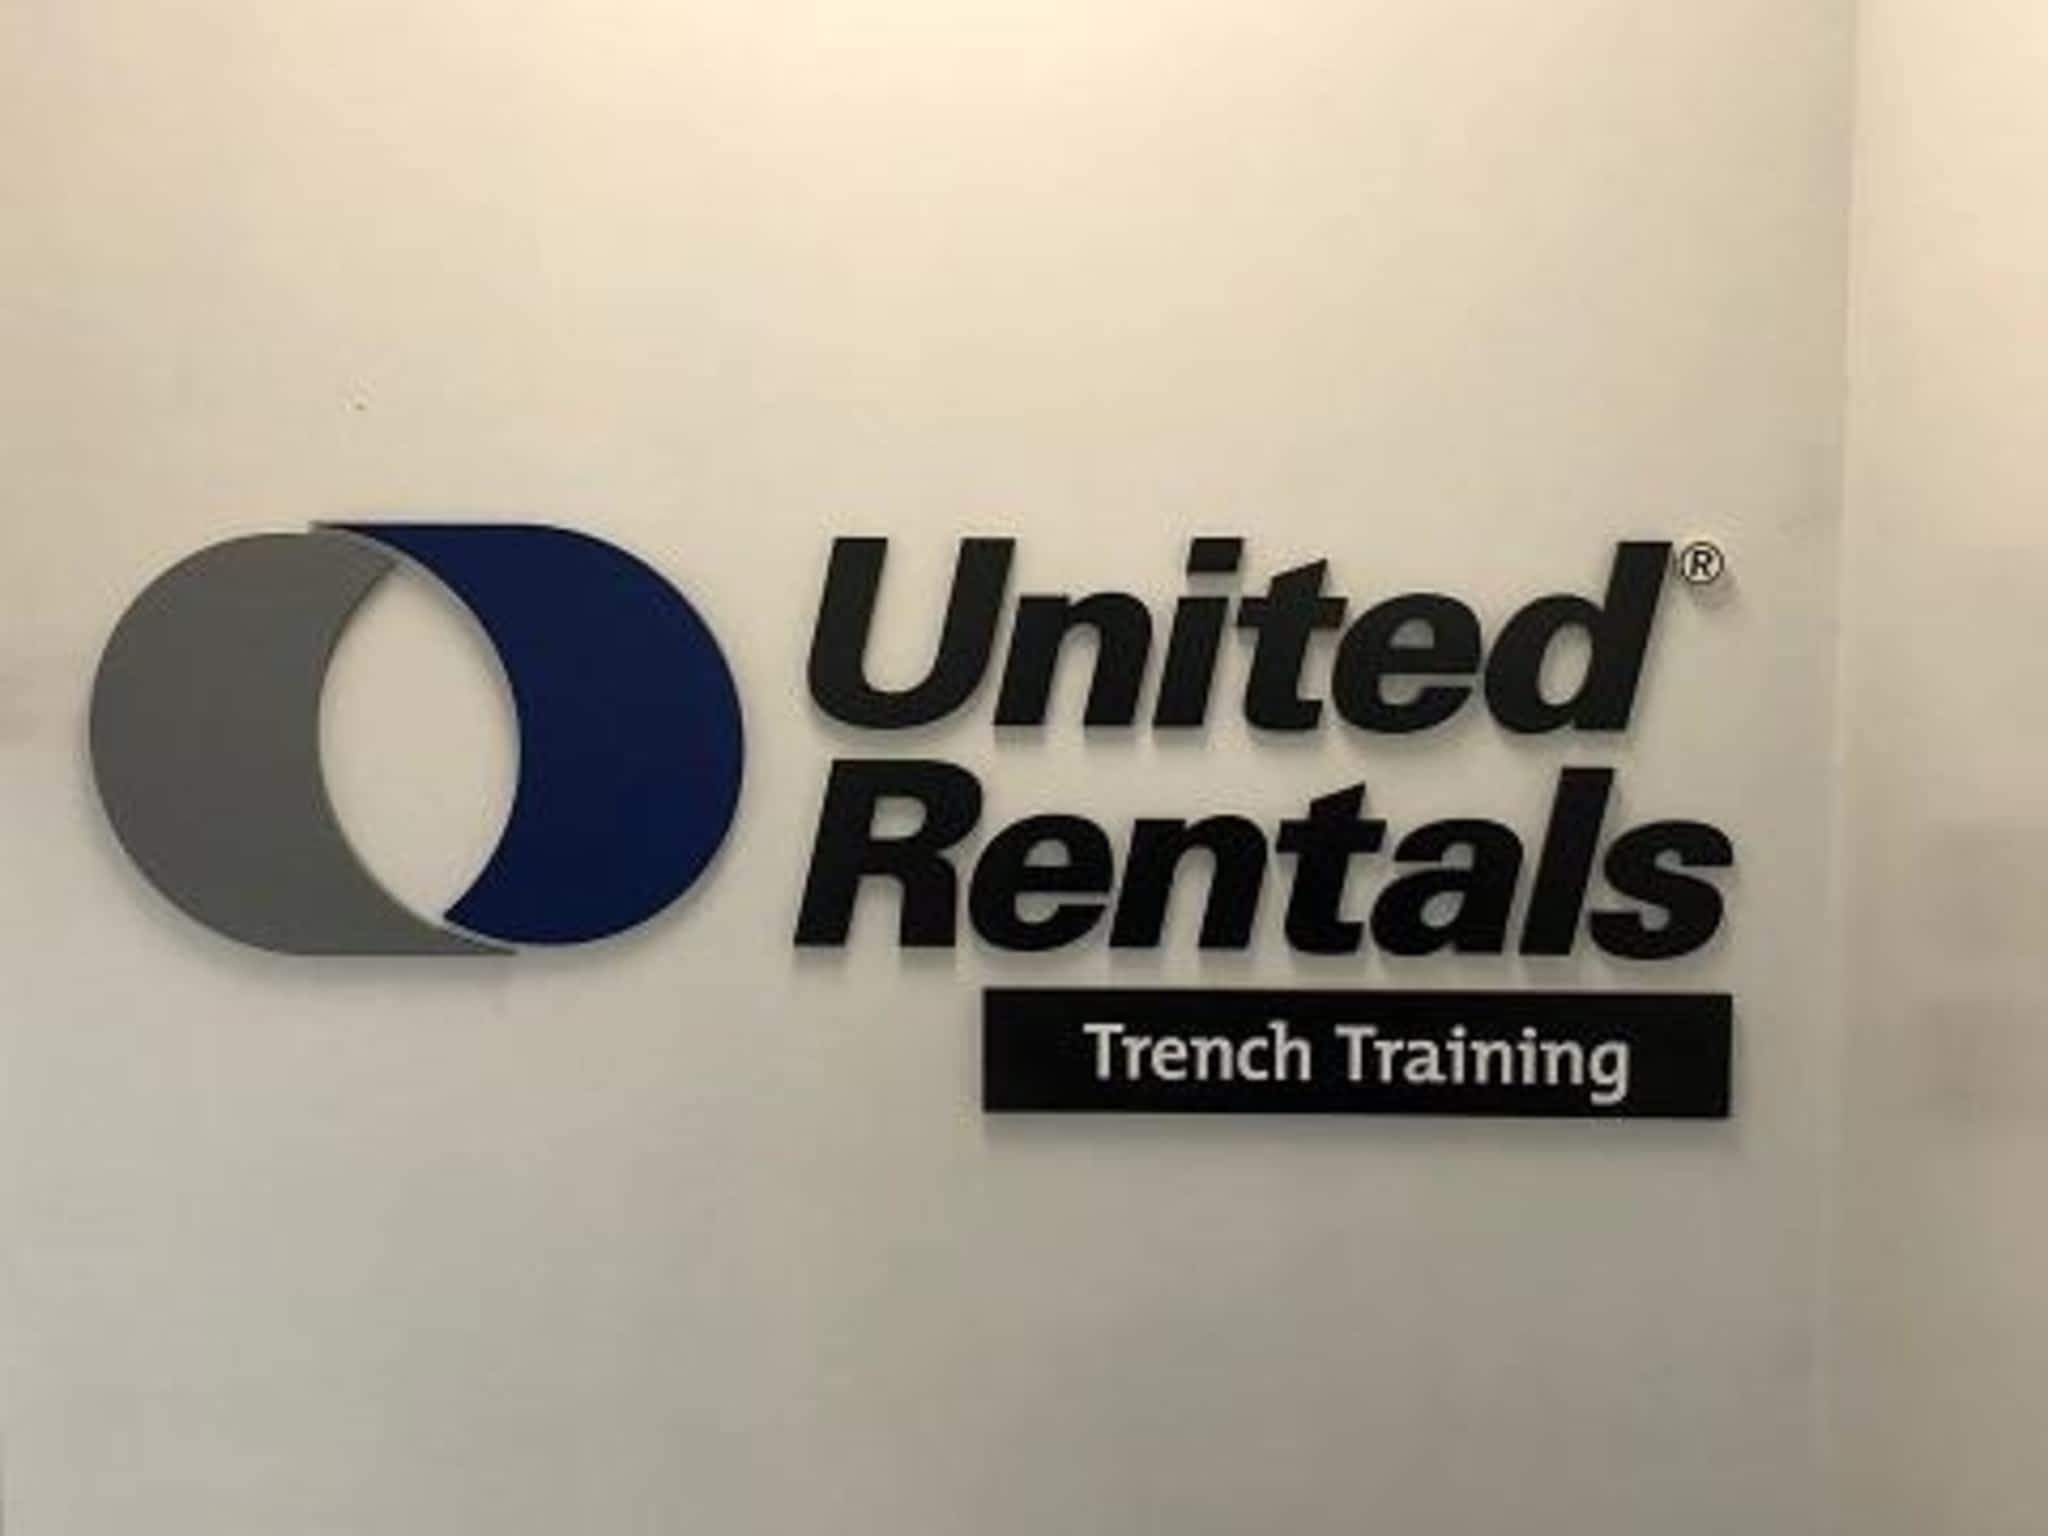 photo United Rentals - Trench Safety